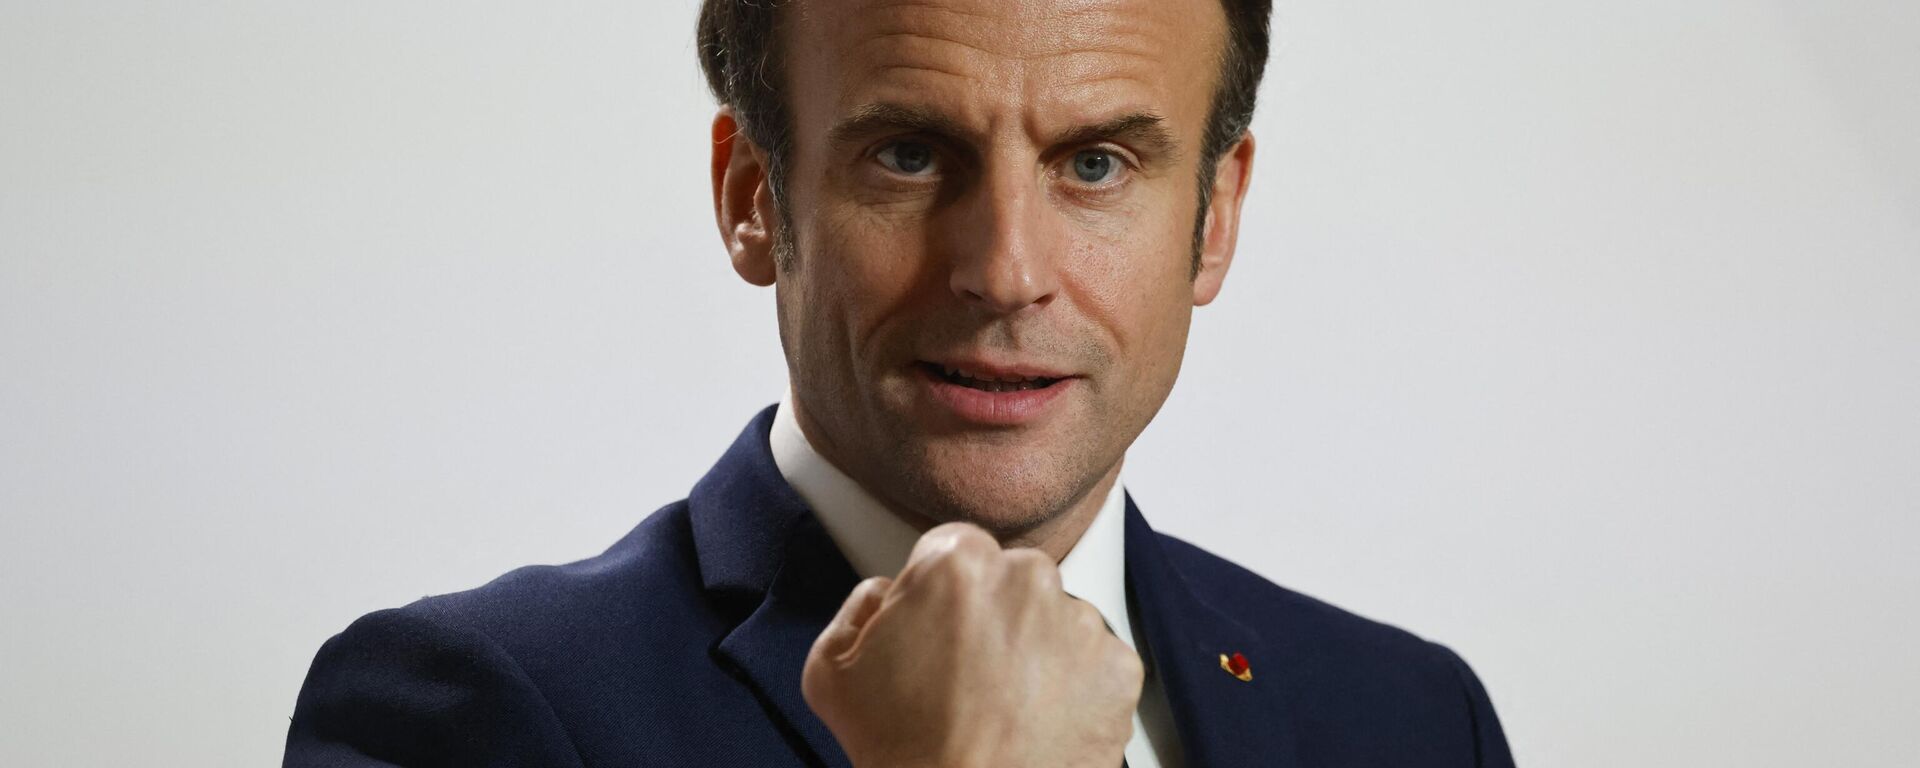 France's President Emmanuel Macron gestures as he talks to the press on the second day of a European Union (EU) summit at the EU Headquarters, in Brussels on March 25, 2022 - Sputnik International, 1920, 23.04.2022